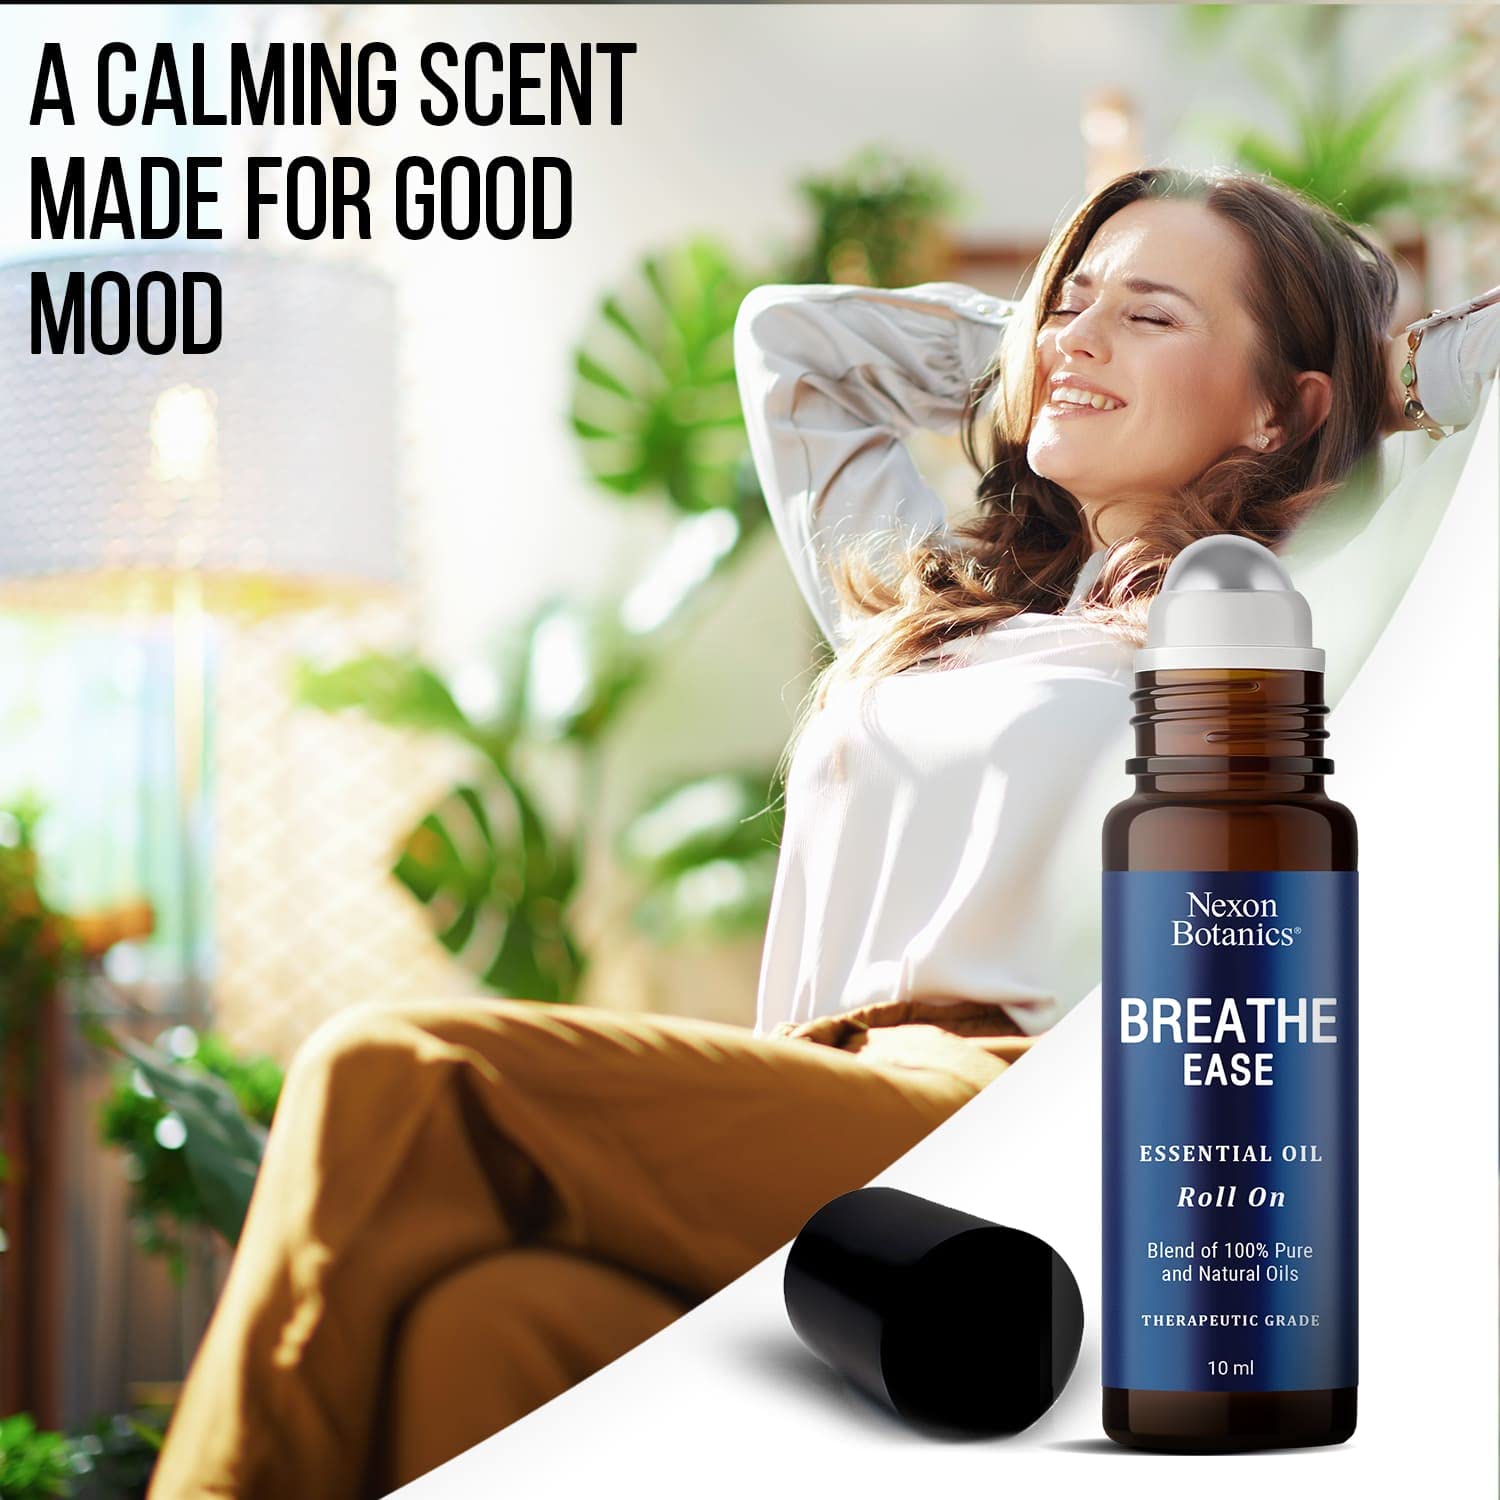 Breathe Ease Essential Oil Roll On Blend 10ml - Breathe Easy Essential Oil Roll-On - Pure Eucalyptus, Peppermint, and Rosemary Oil Blend for Clear Breathing and Respiratory Support - Nexon Botanics